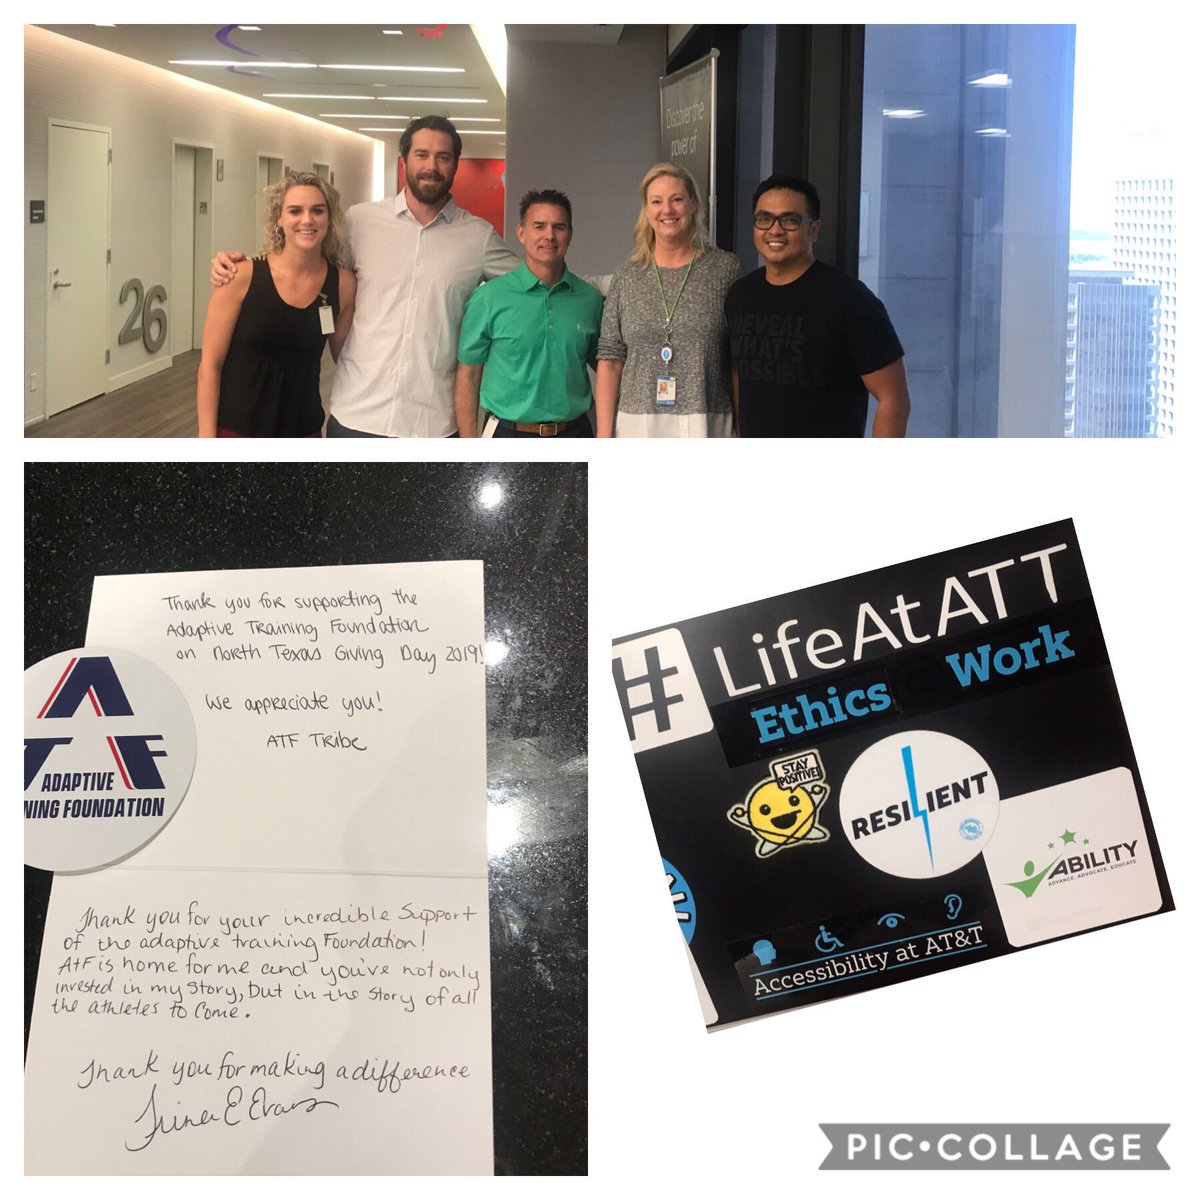 Making the magic of ERGs happen with the Adaptive Training Foundation at AT&T HQ. The ATF is an incredible organization that transforms the most vulnerable into the strongest people you will ever meet. 

#lifeatatt
#adaptivetrainingfoundation
#abilityERG
#strengthinvulnerABILITY